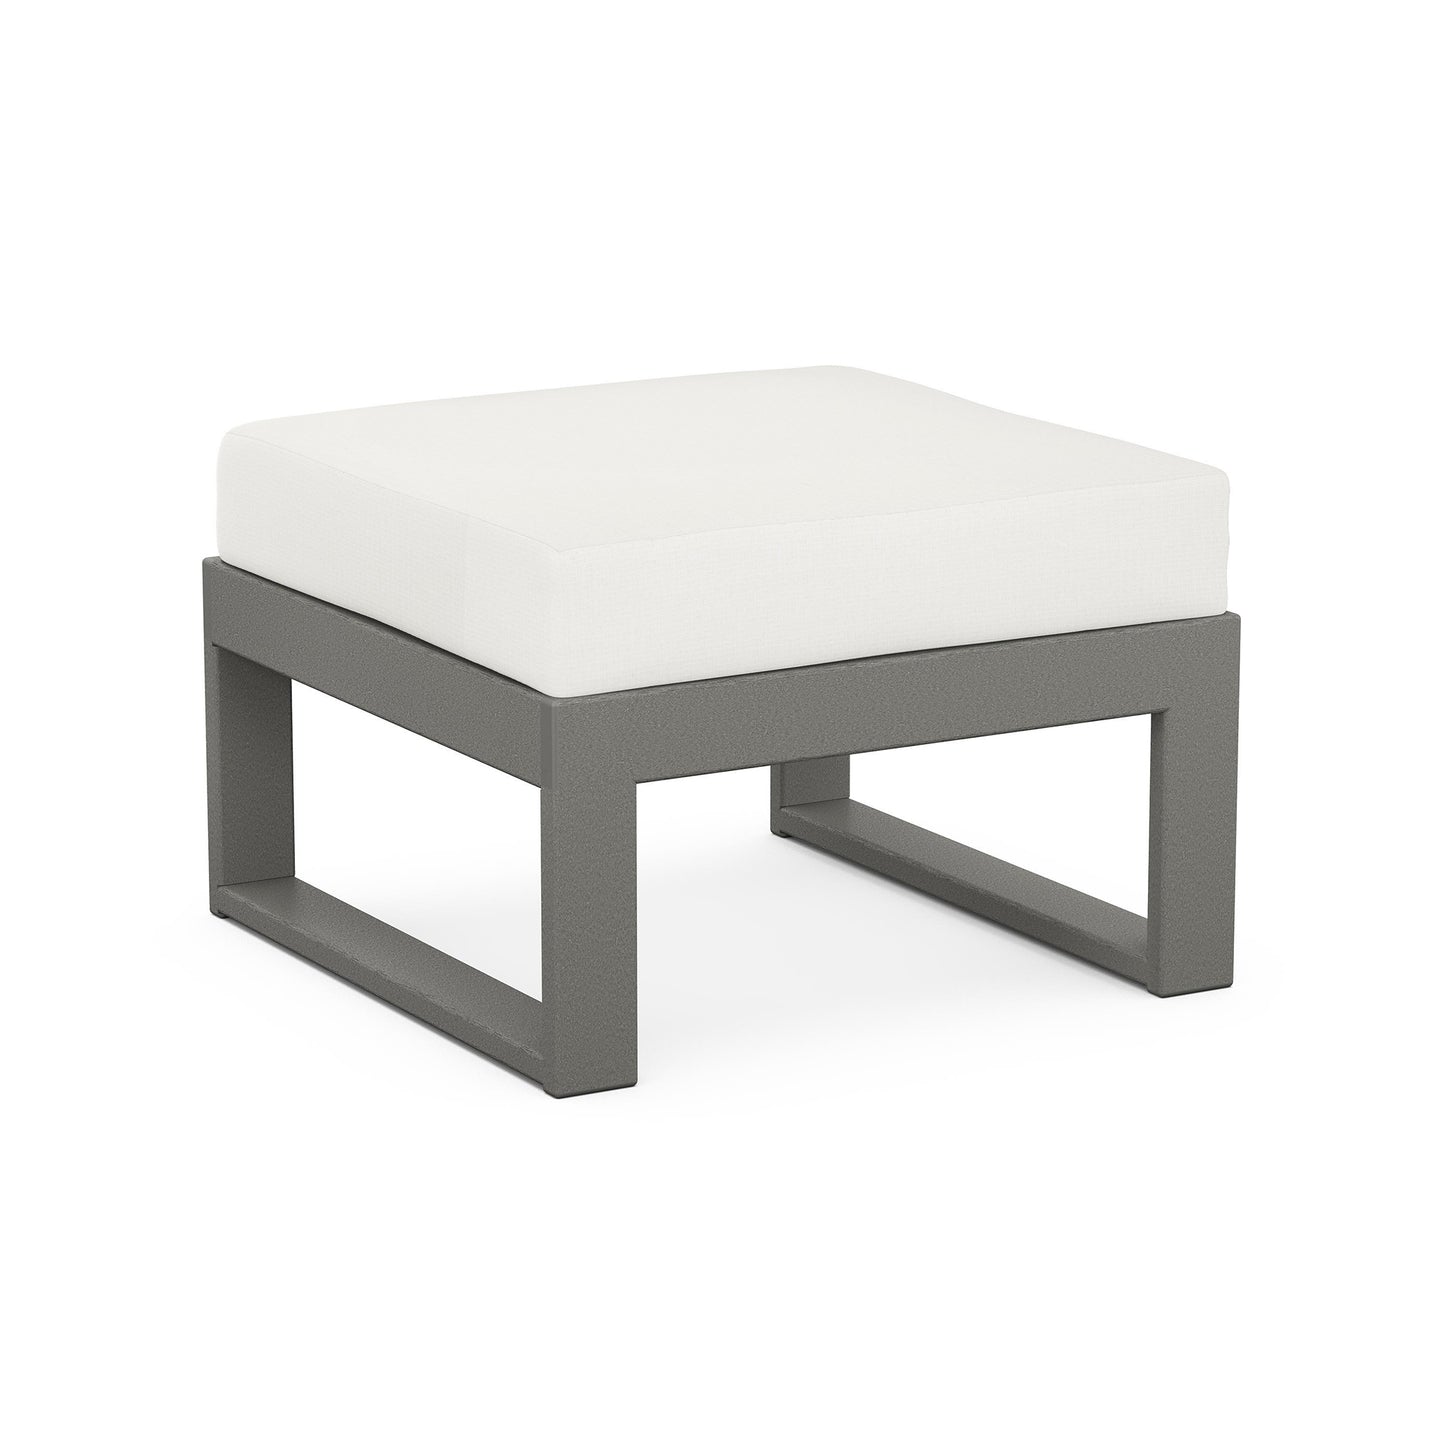 A modern ottoman from the POLYWOOD® Modular Ottoman collection, featuring a gray metal frame and a square white cushion, presented against an isolated white background.